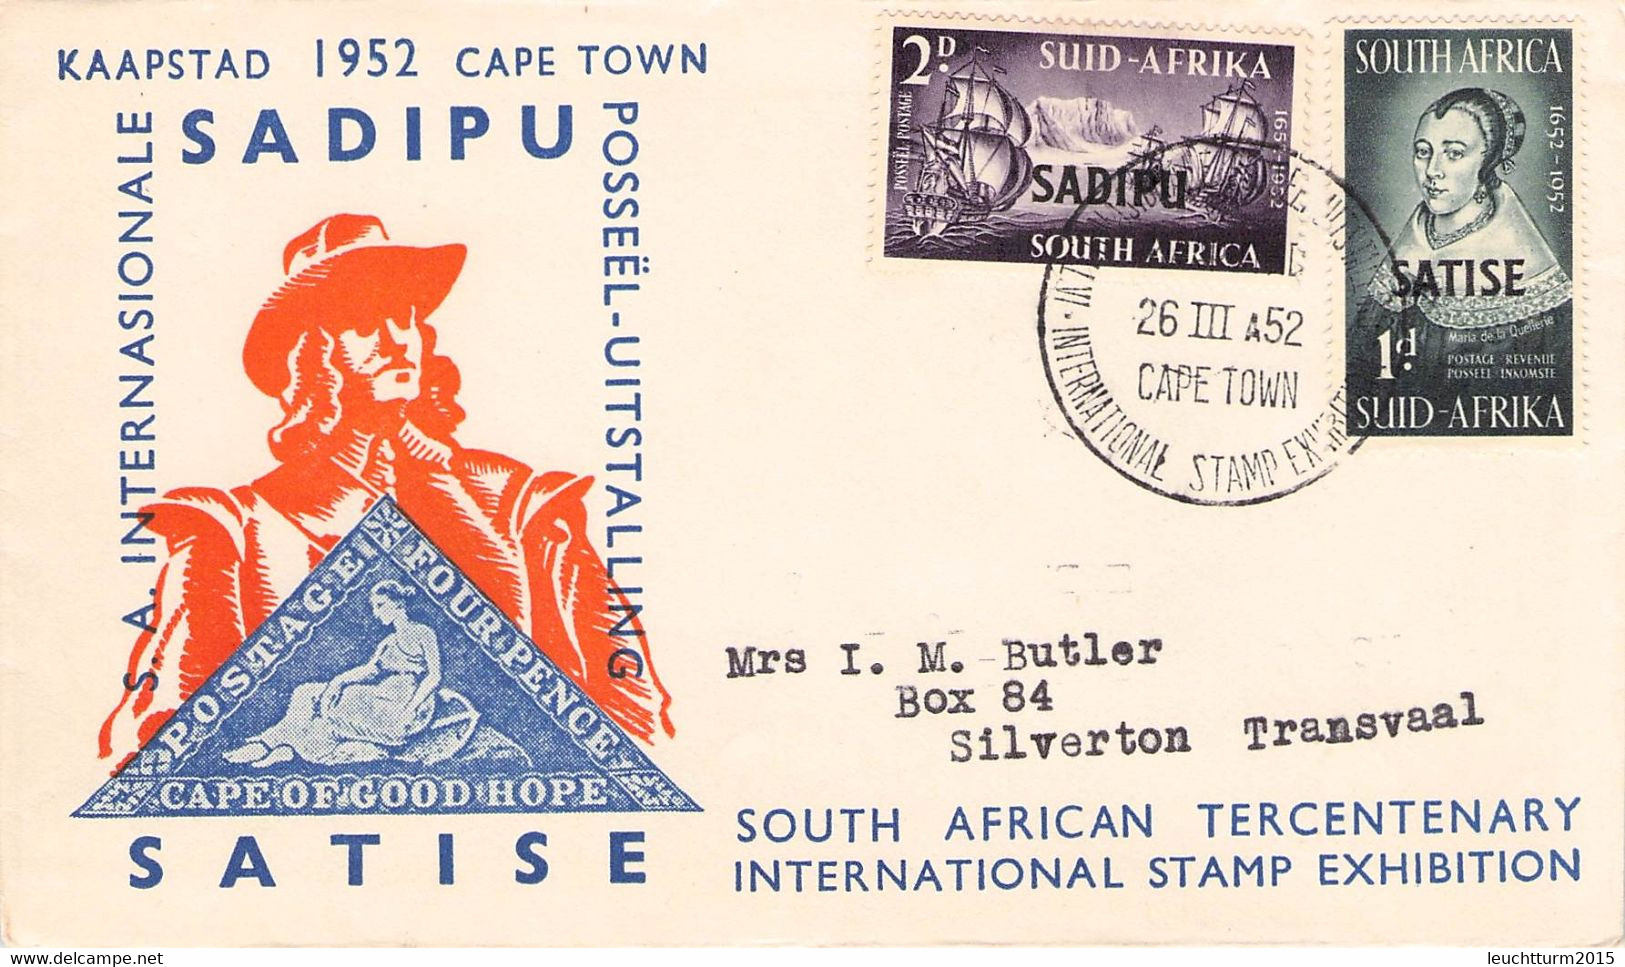 SOUTH AFRICA - FDC 1952 SOUTH AFRICAN STAMP EXHIBITION #229-230 / ZM86 - FDC